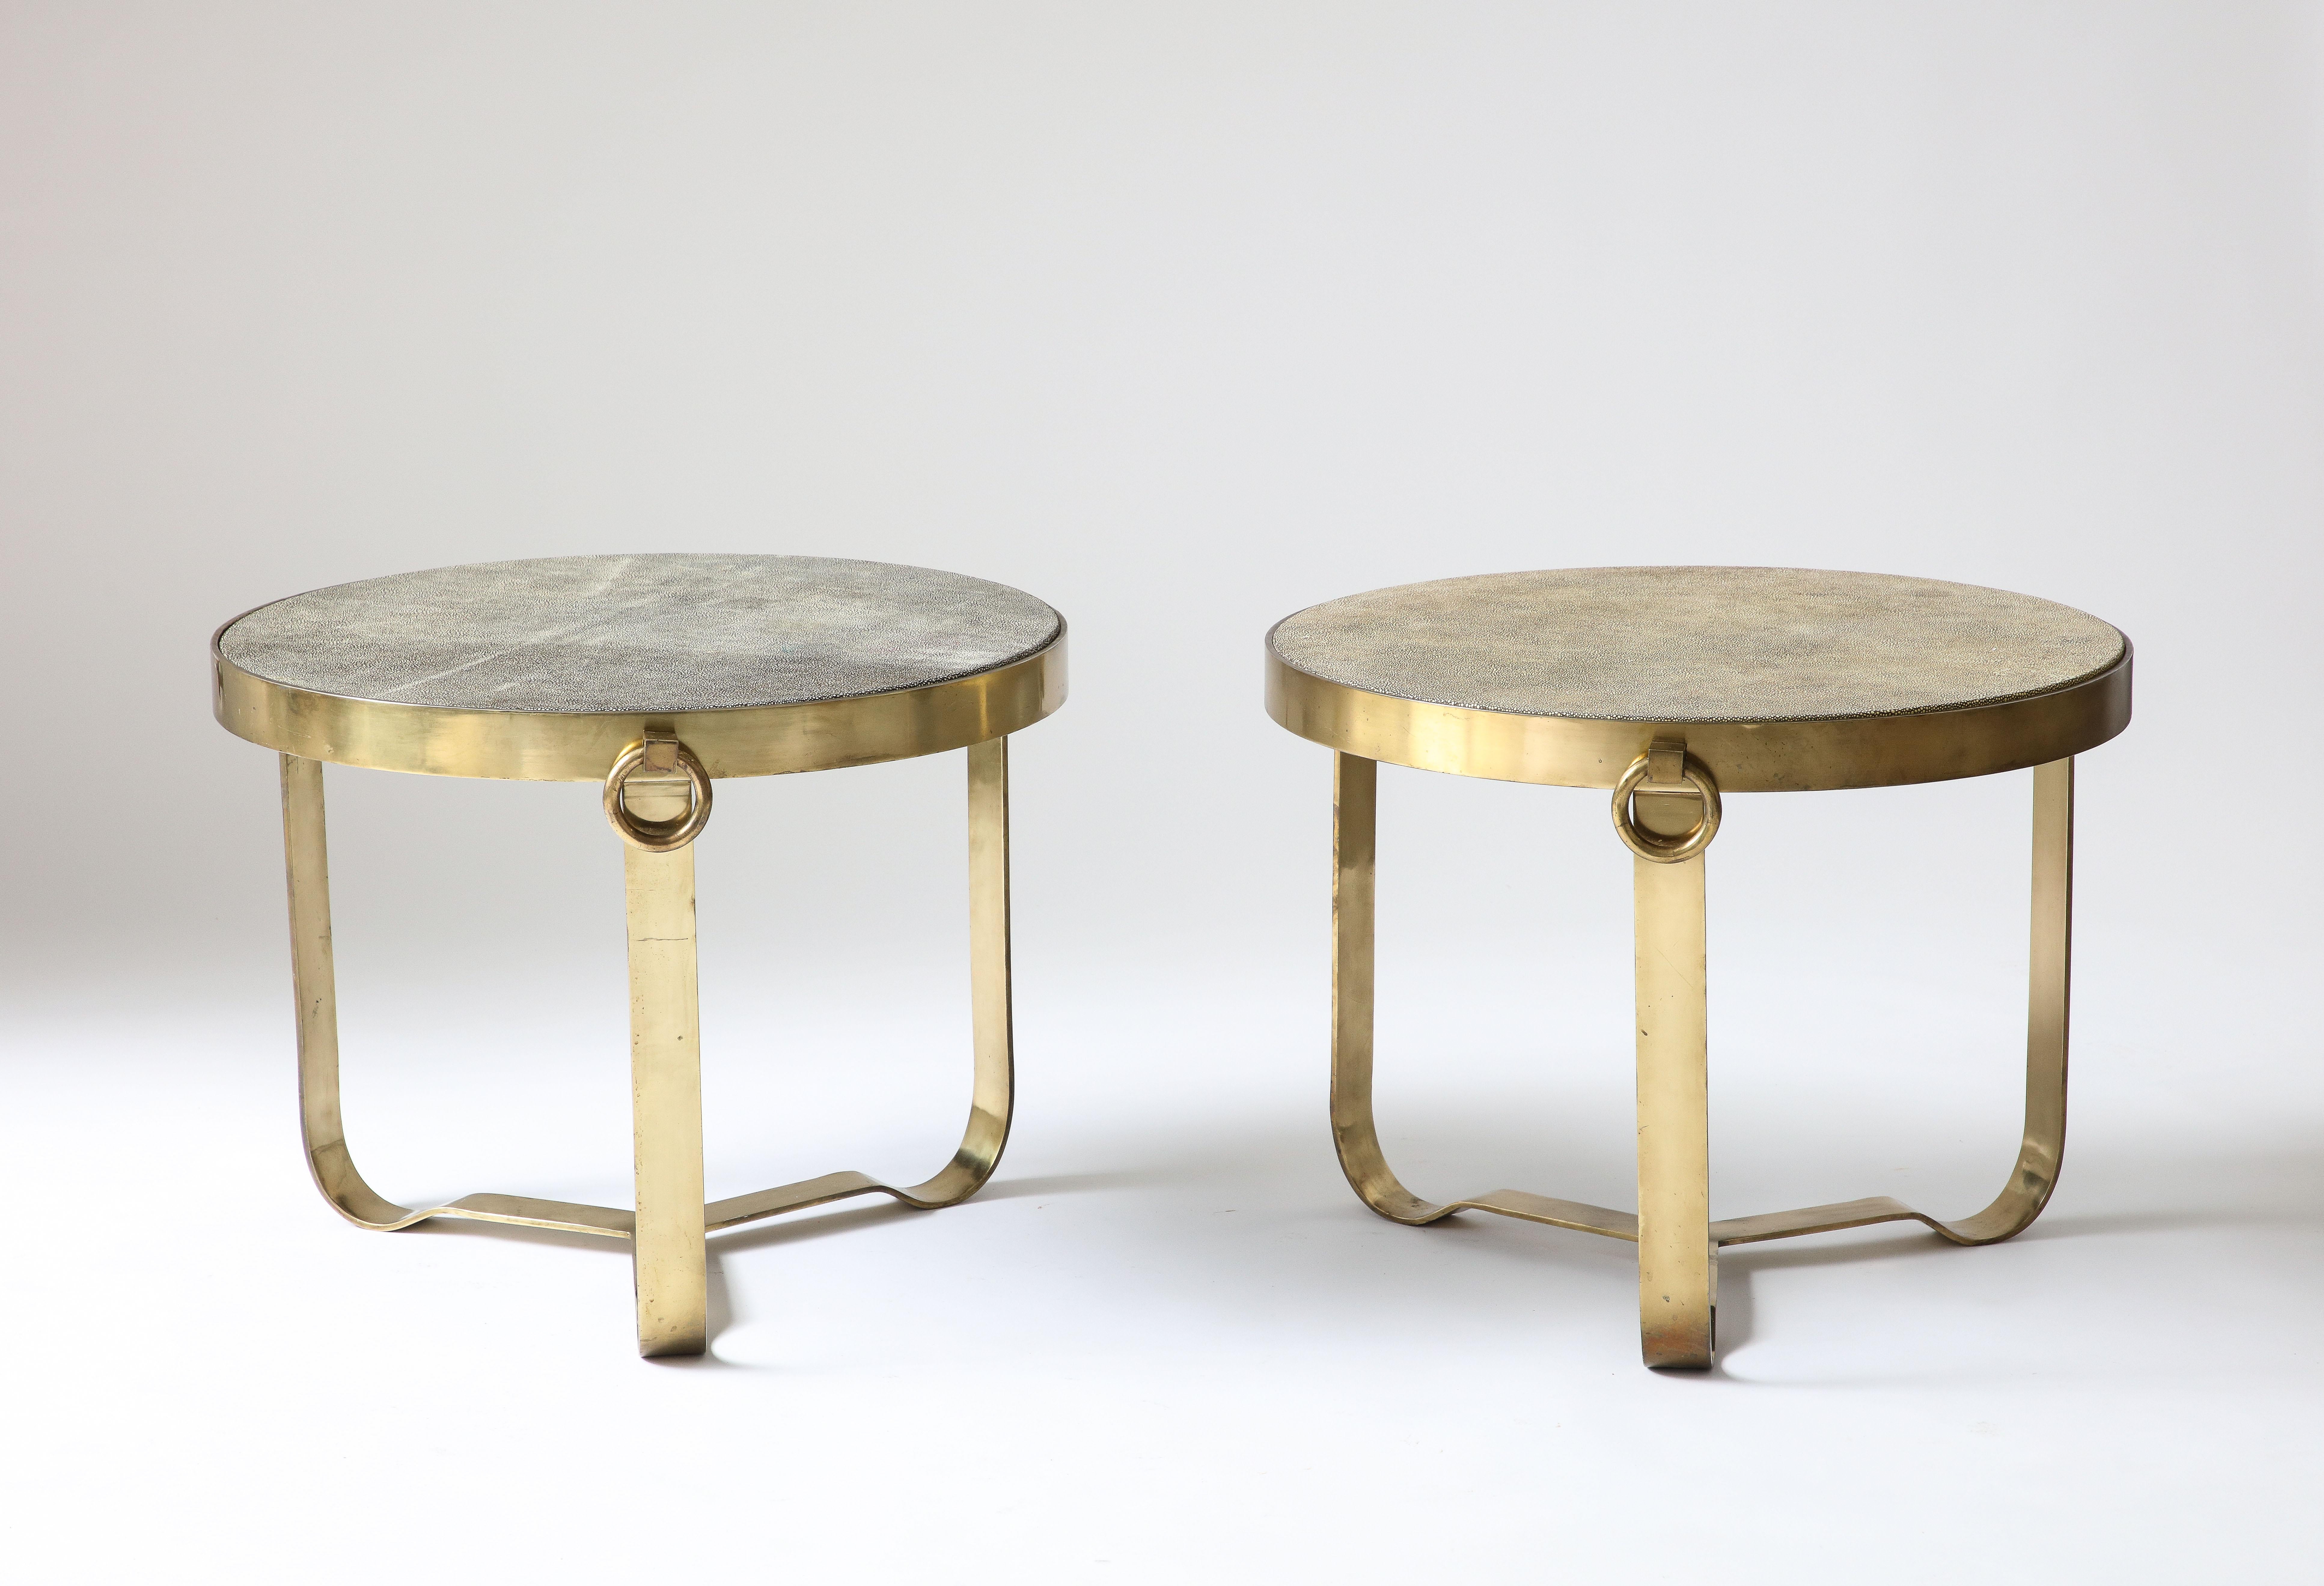 Two Available; priced individually.

Elegant, old-world side tables with beautiful green-blue shagreen on the tops.